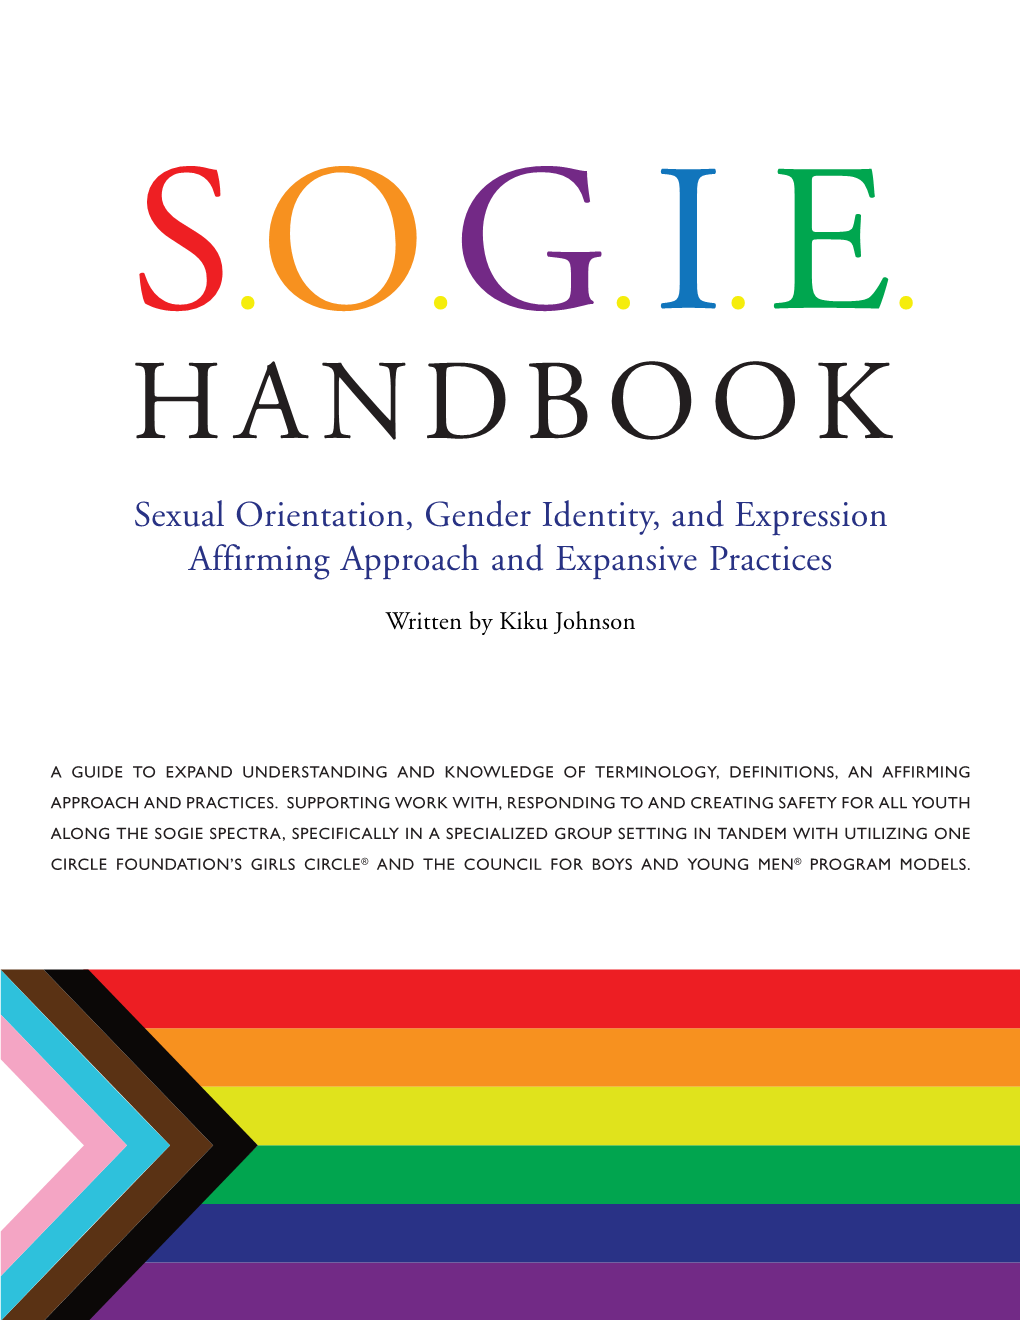 Sexual Orientation, Gender Identity, and Expression Affirming Approach and Expansive Practices